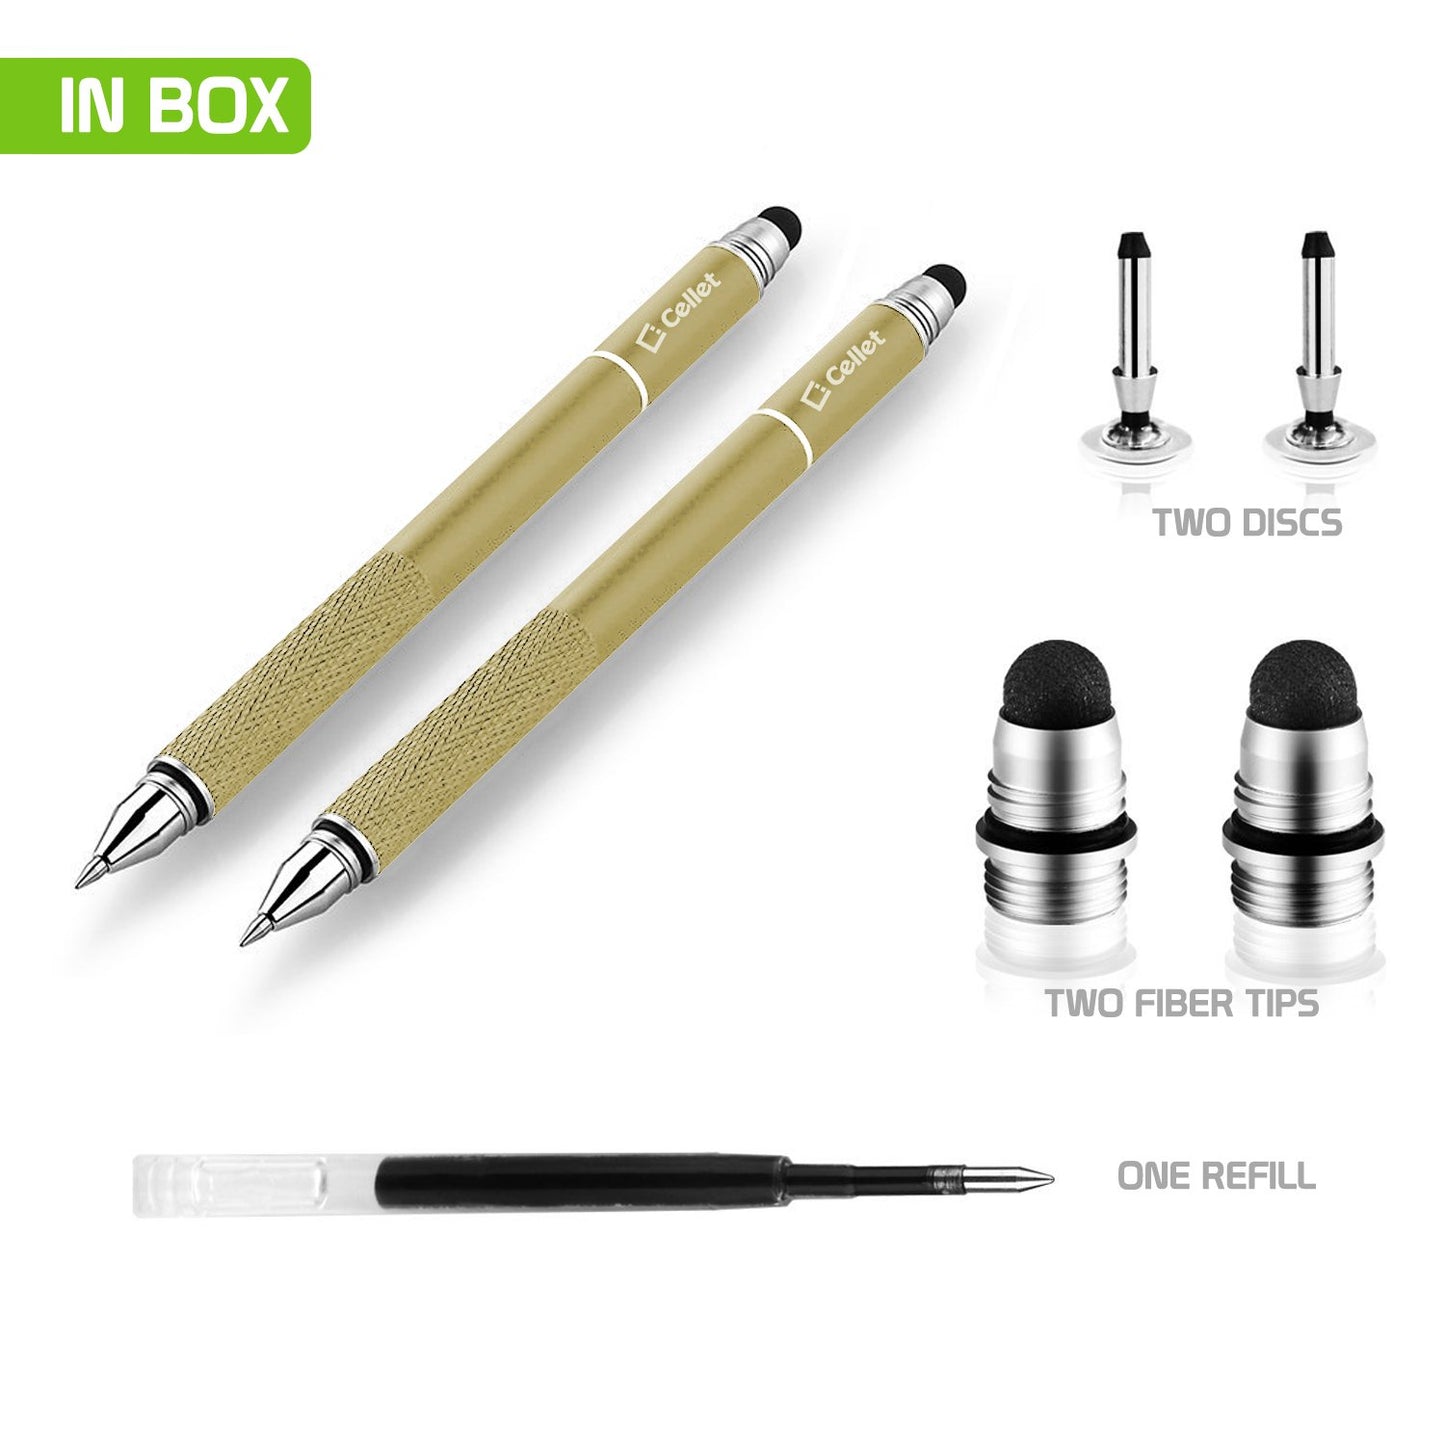 PENDISCGD - 3 in 1 Stylus Pen (Ballpoint Pen, Precision Clear Disc Pen, Capacitive Stylus Pen), 2 Stylus Pens with Replacement Tips - Gold